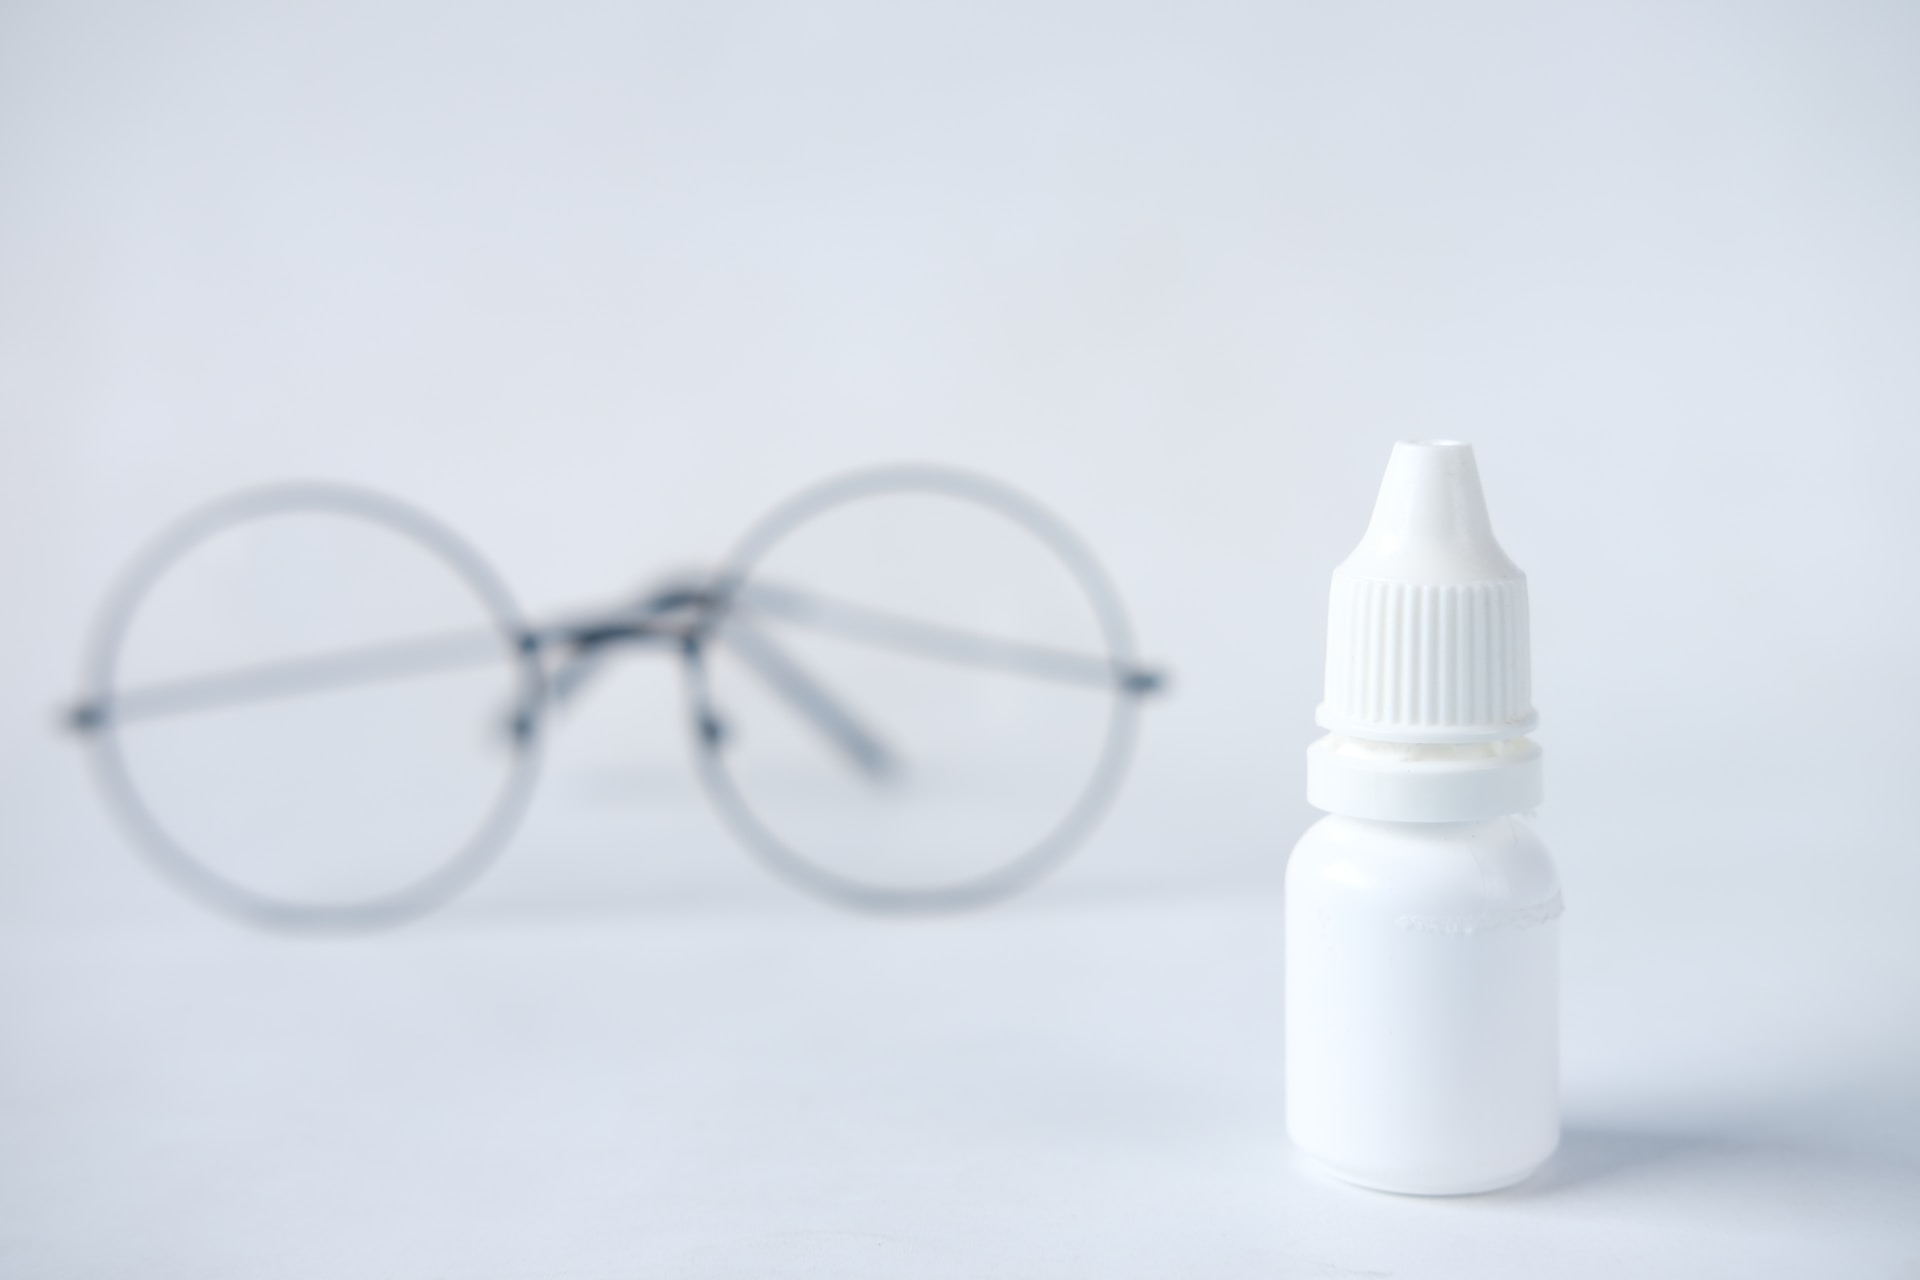 Small eye drops in unlabeled white container, with a black-rimmed round eye glasses blurred in the background